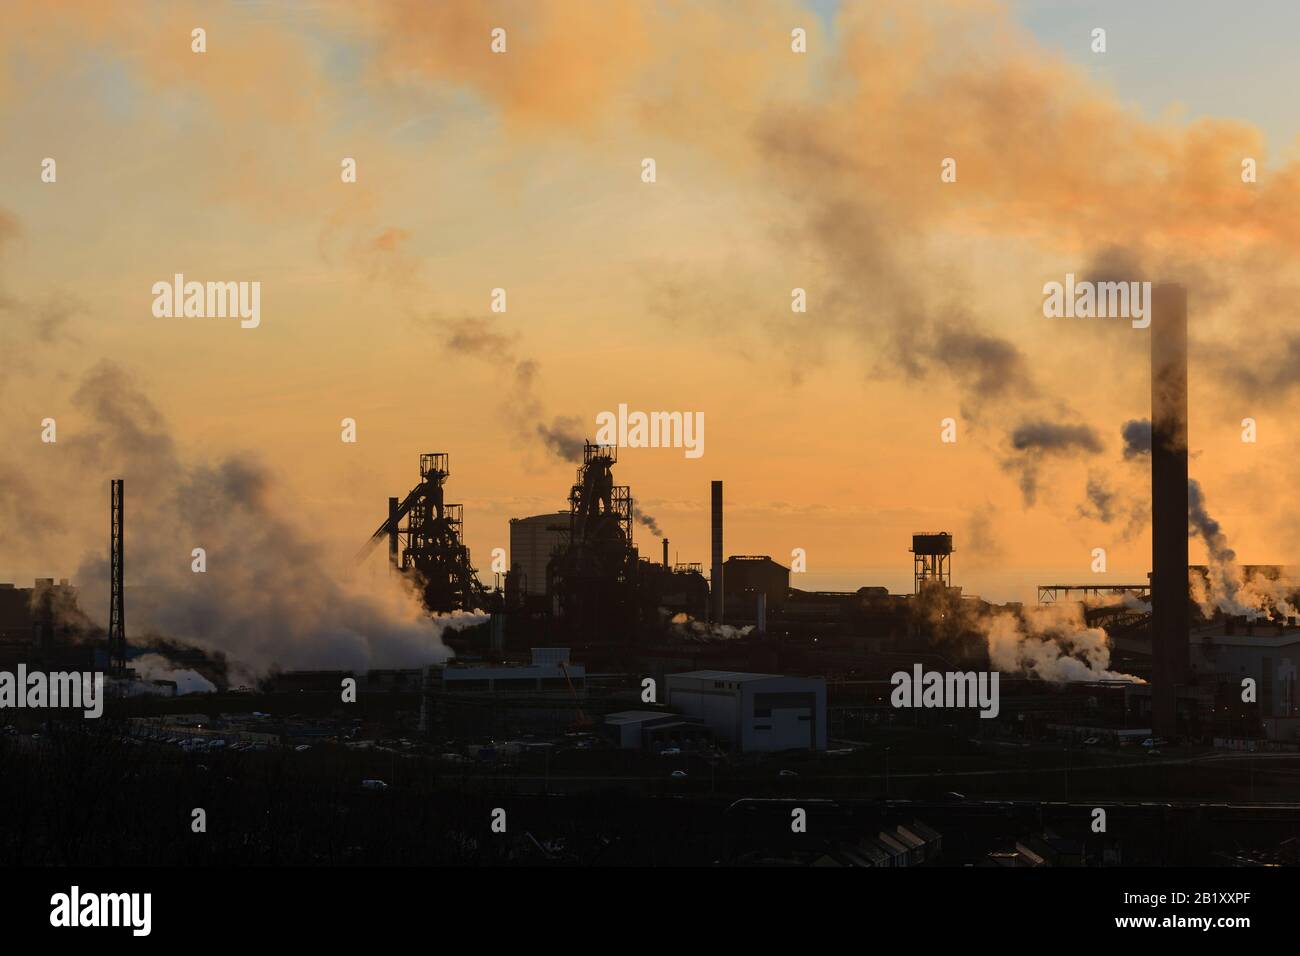 Port Talbot steel works emitting clouds of steam in the evening light Port Talbot Swansea Glamorgan Wales Stock Photo